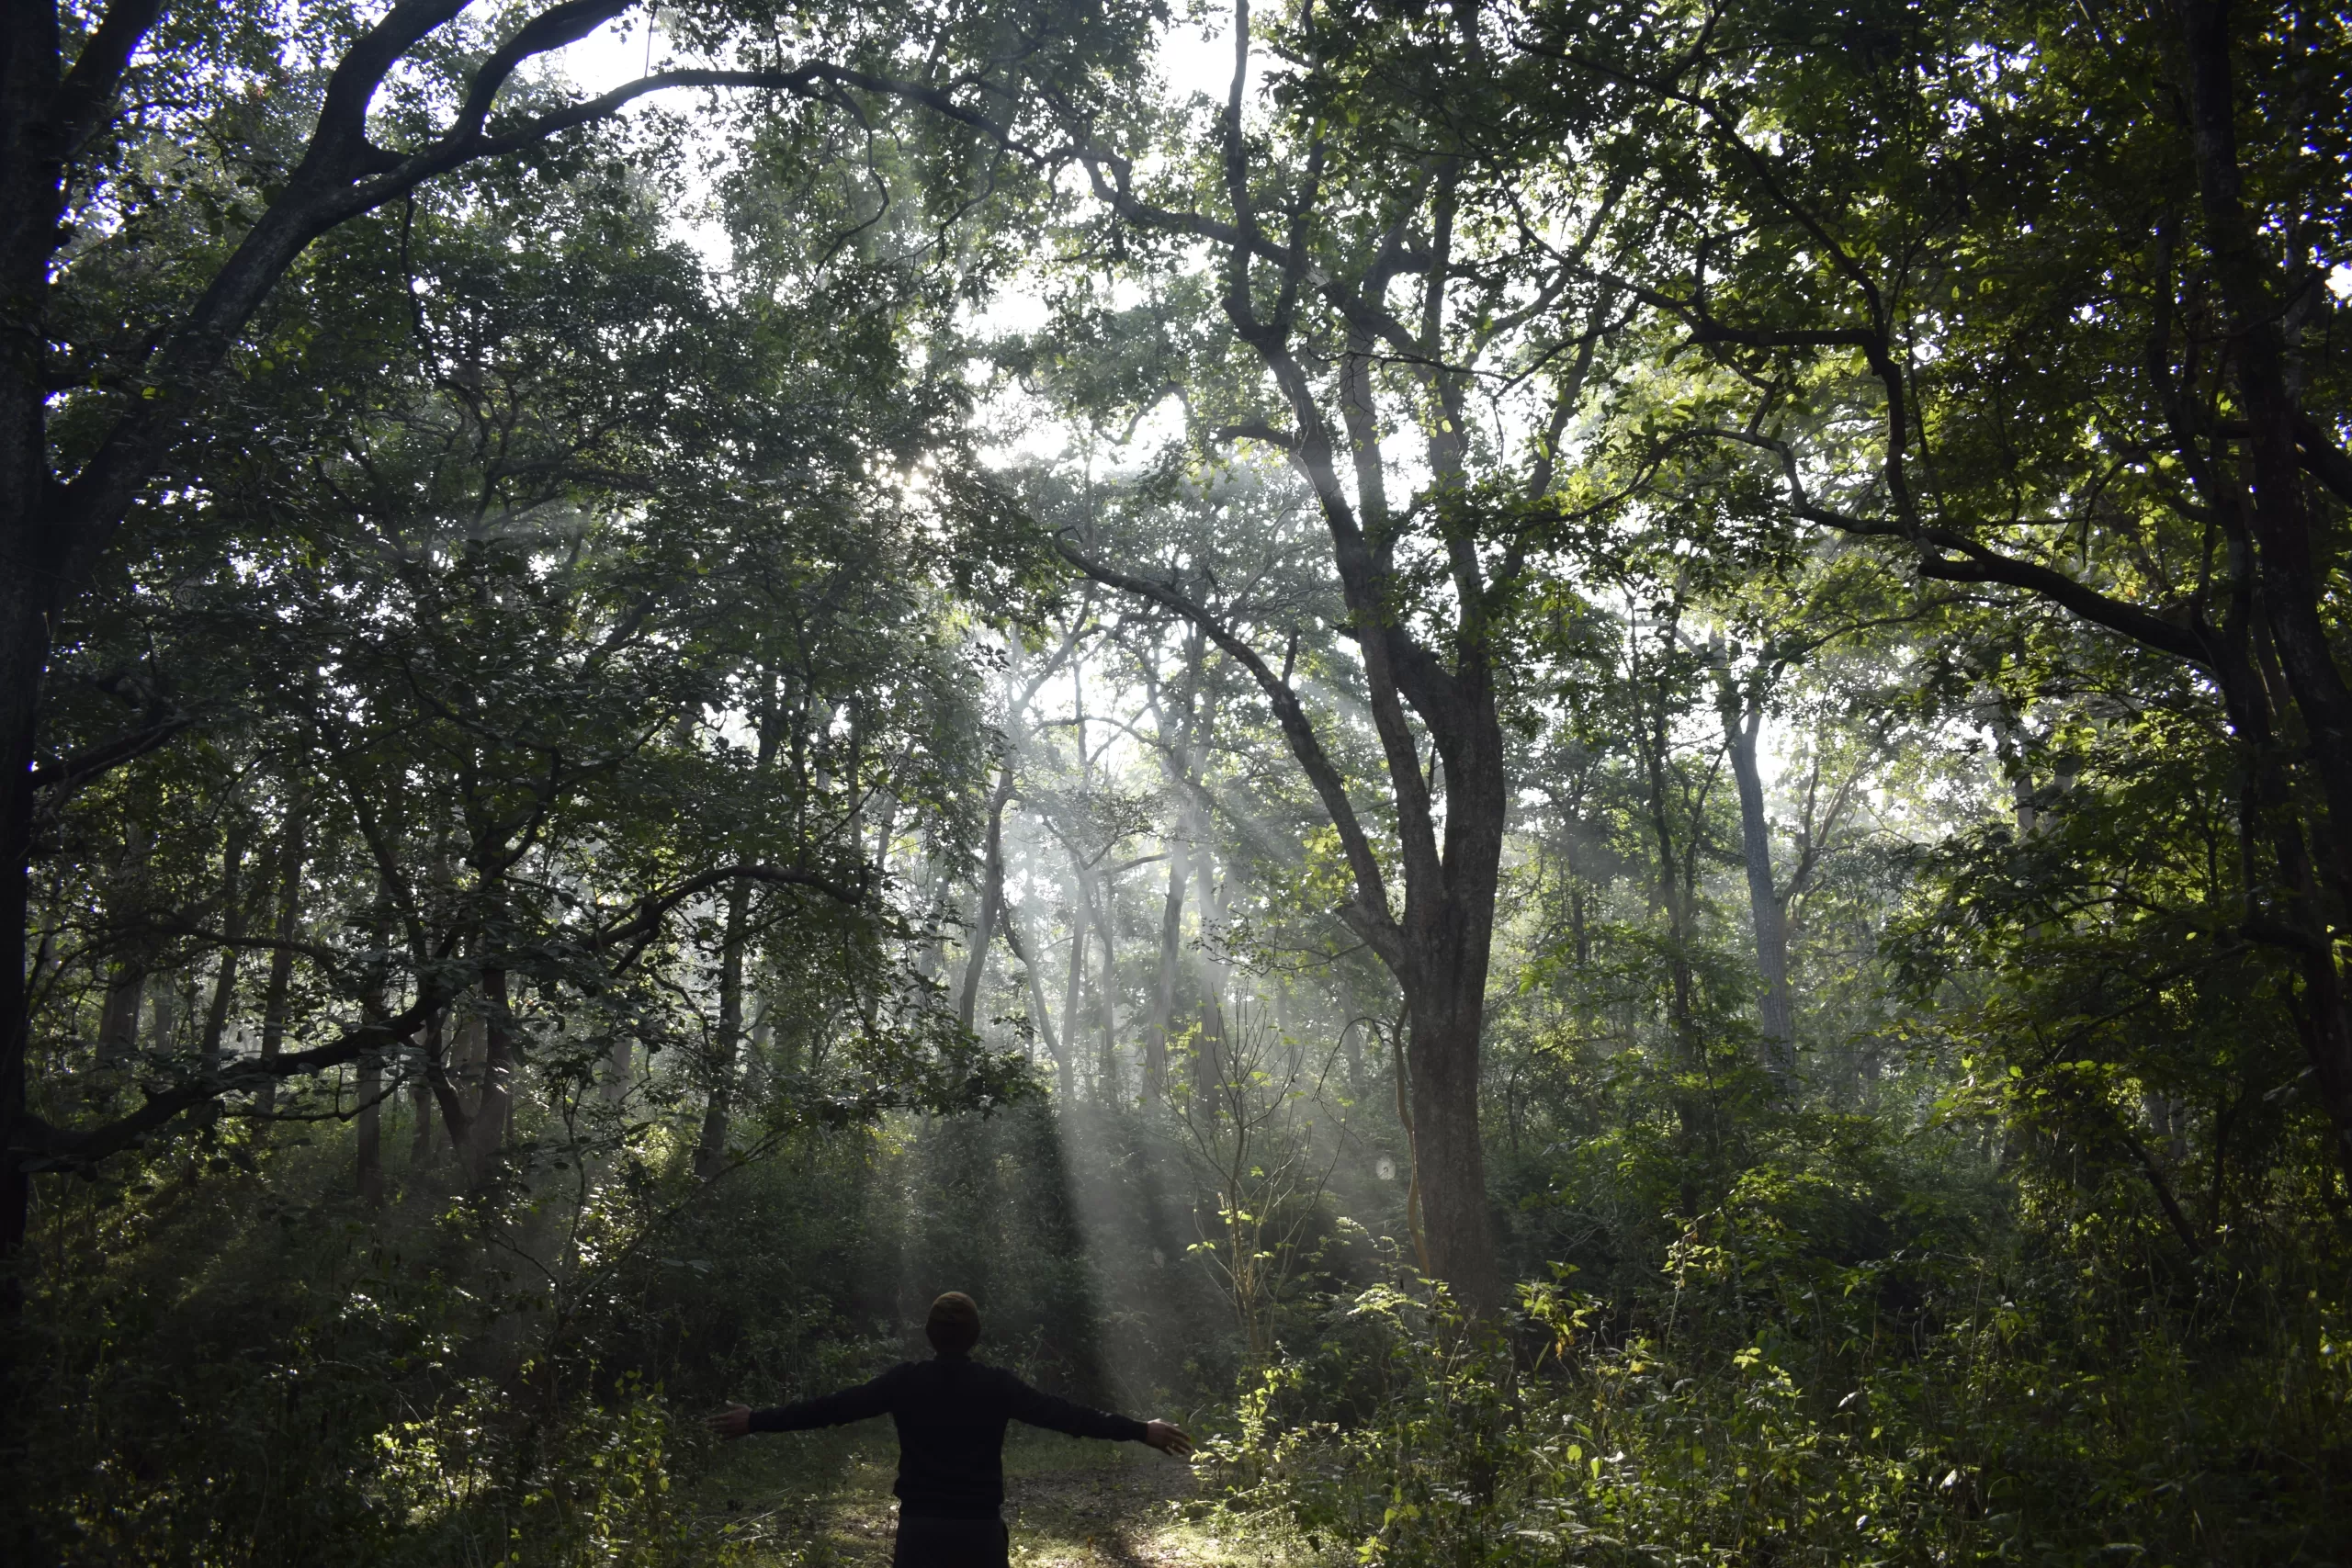 A boy standing amidst the jungle of dandeli, gazing towards the sunlight filtering through the dense foliage, illuminating the natural beauty around him.